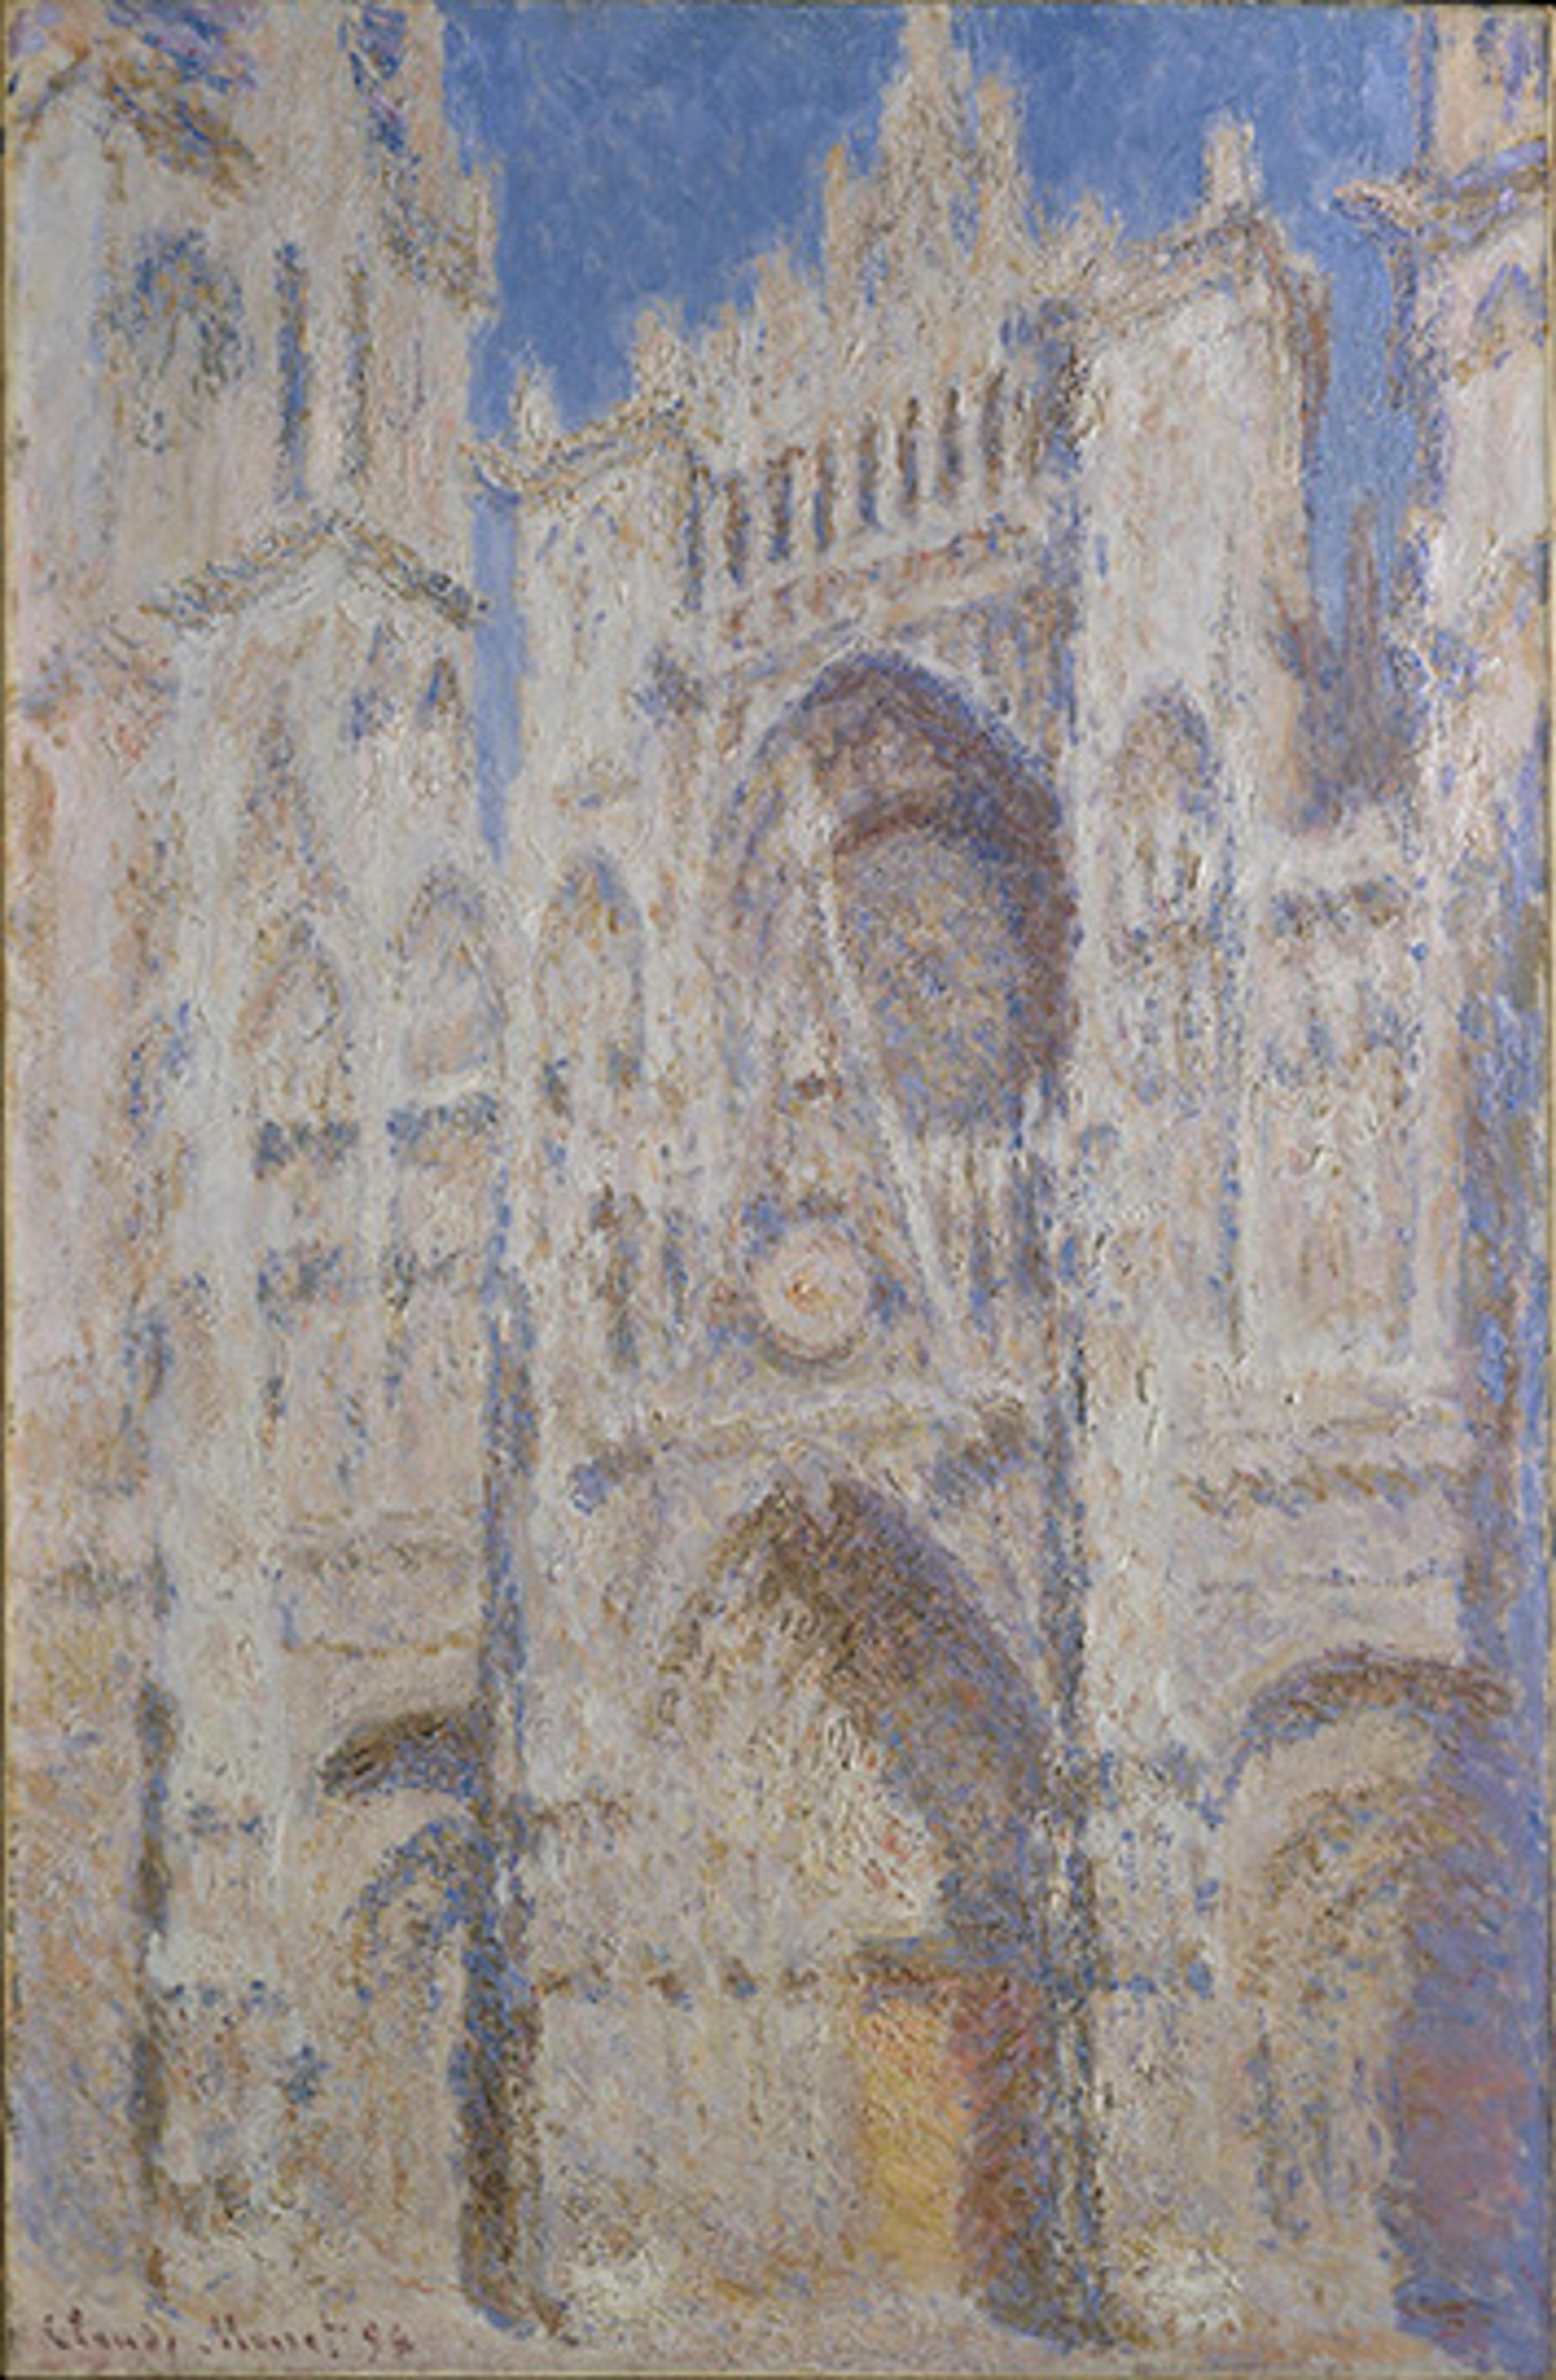 Rouen Cathedral (1894) by Monet